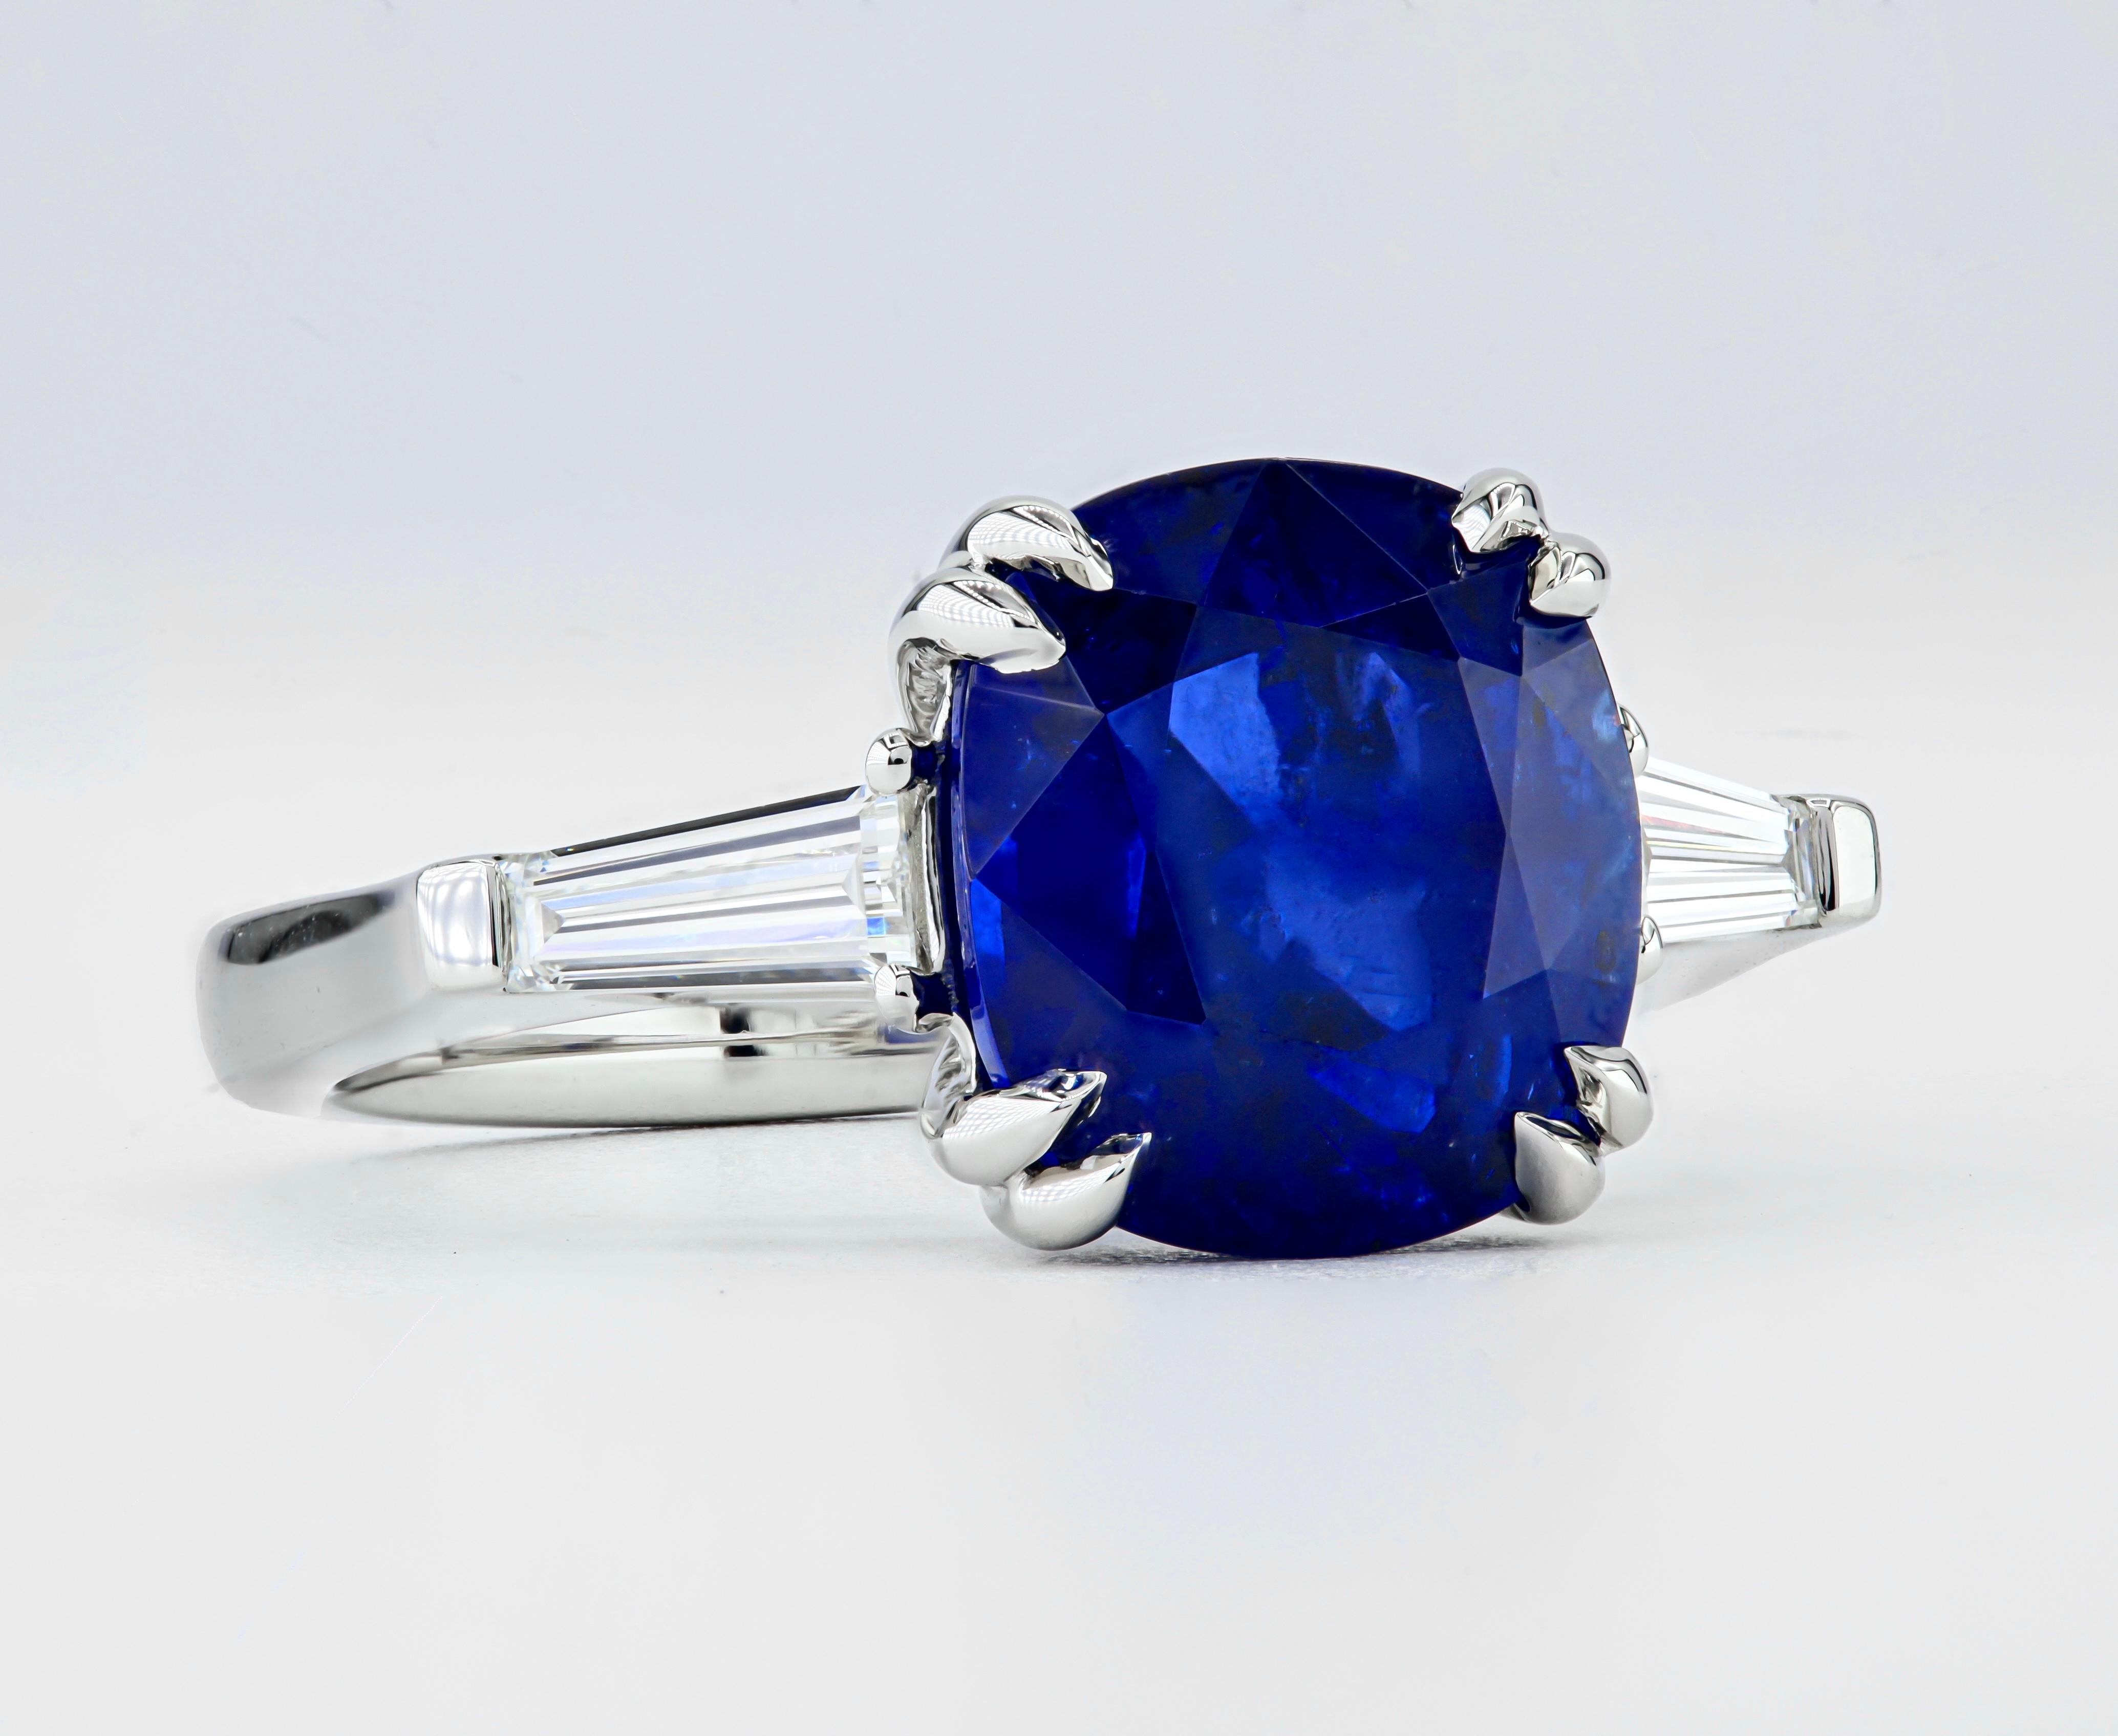 This expertly crafted ring features a GIA Certified 5.54ct Luscious/Vibrant Blue Sri Lankan Sapphire, securely nestled in a comfortable fit Platinum three-stone setting. It is elegantly complemented by a pair of exquisite E/F VS+ Tapered Baguette